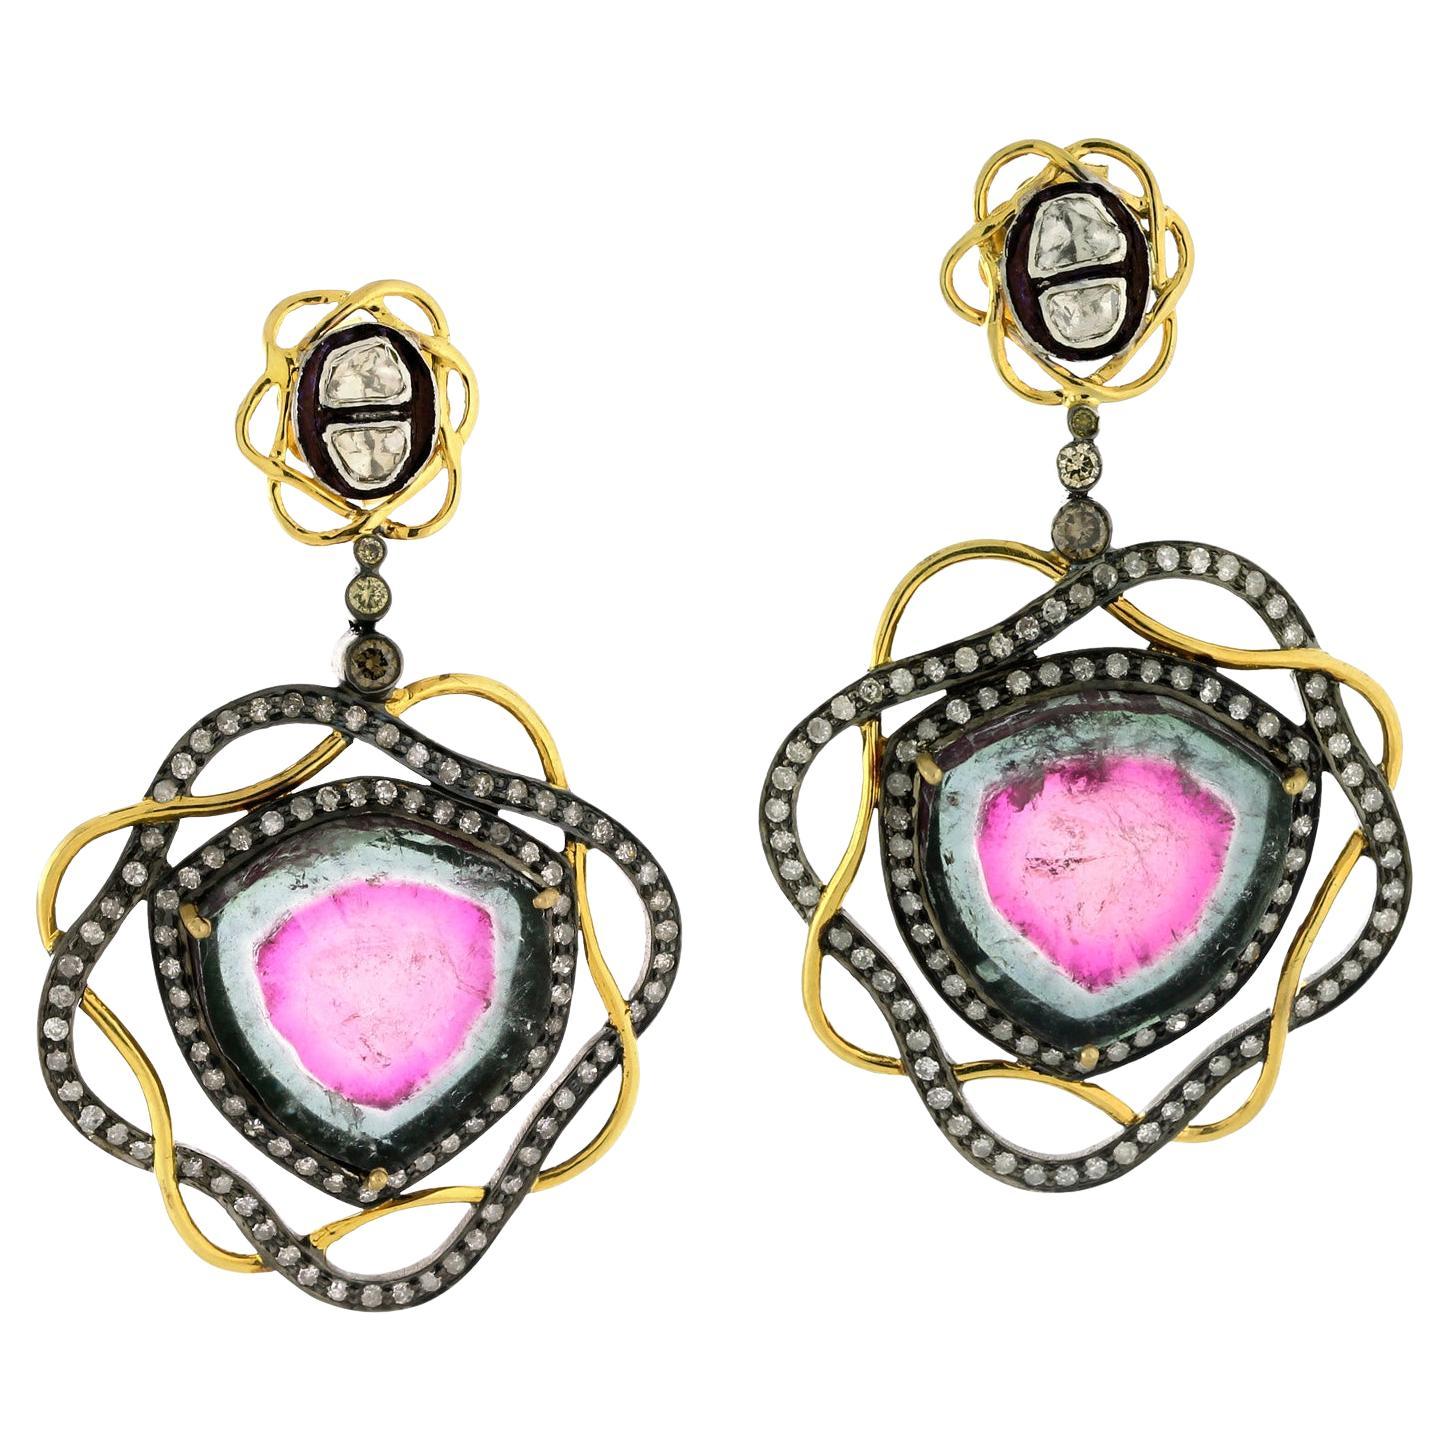 Pink Tourmaline earring Enclosed In Pave Diamonds Set Made In 18k Gold & Silver